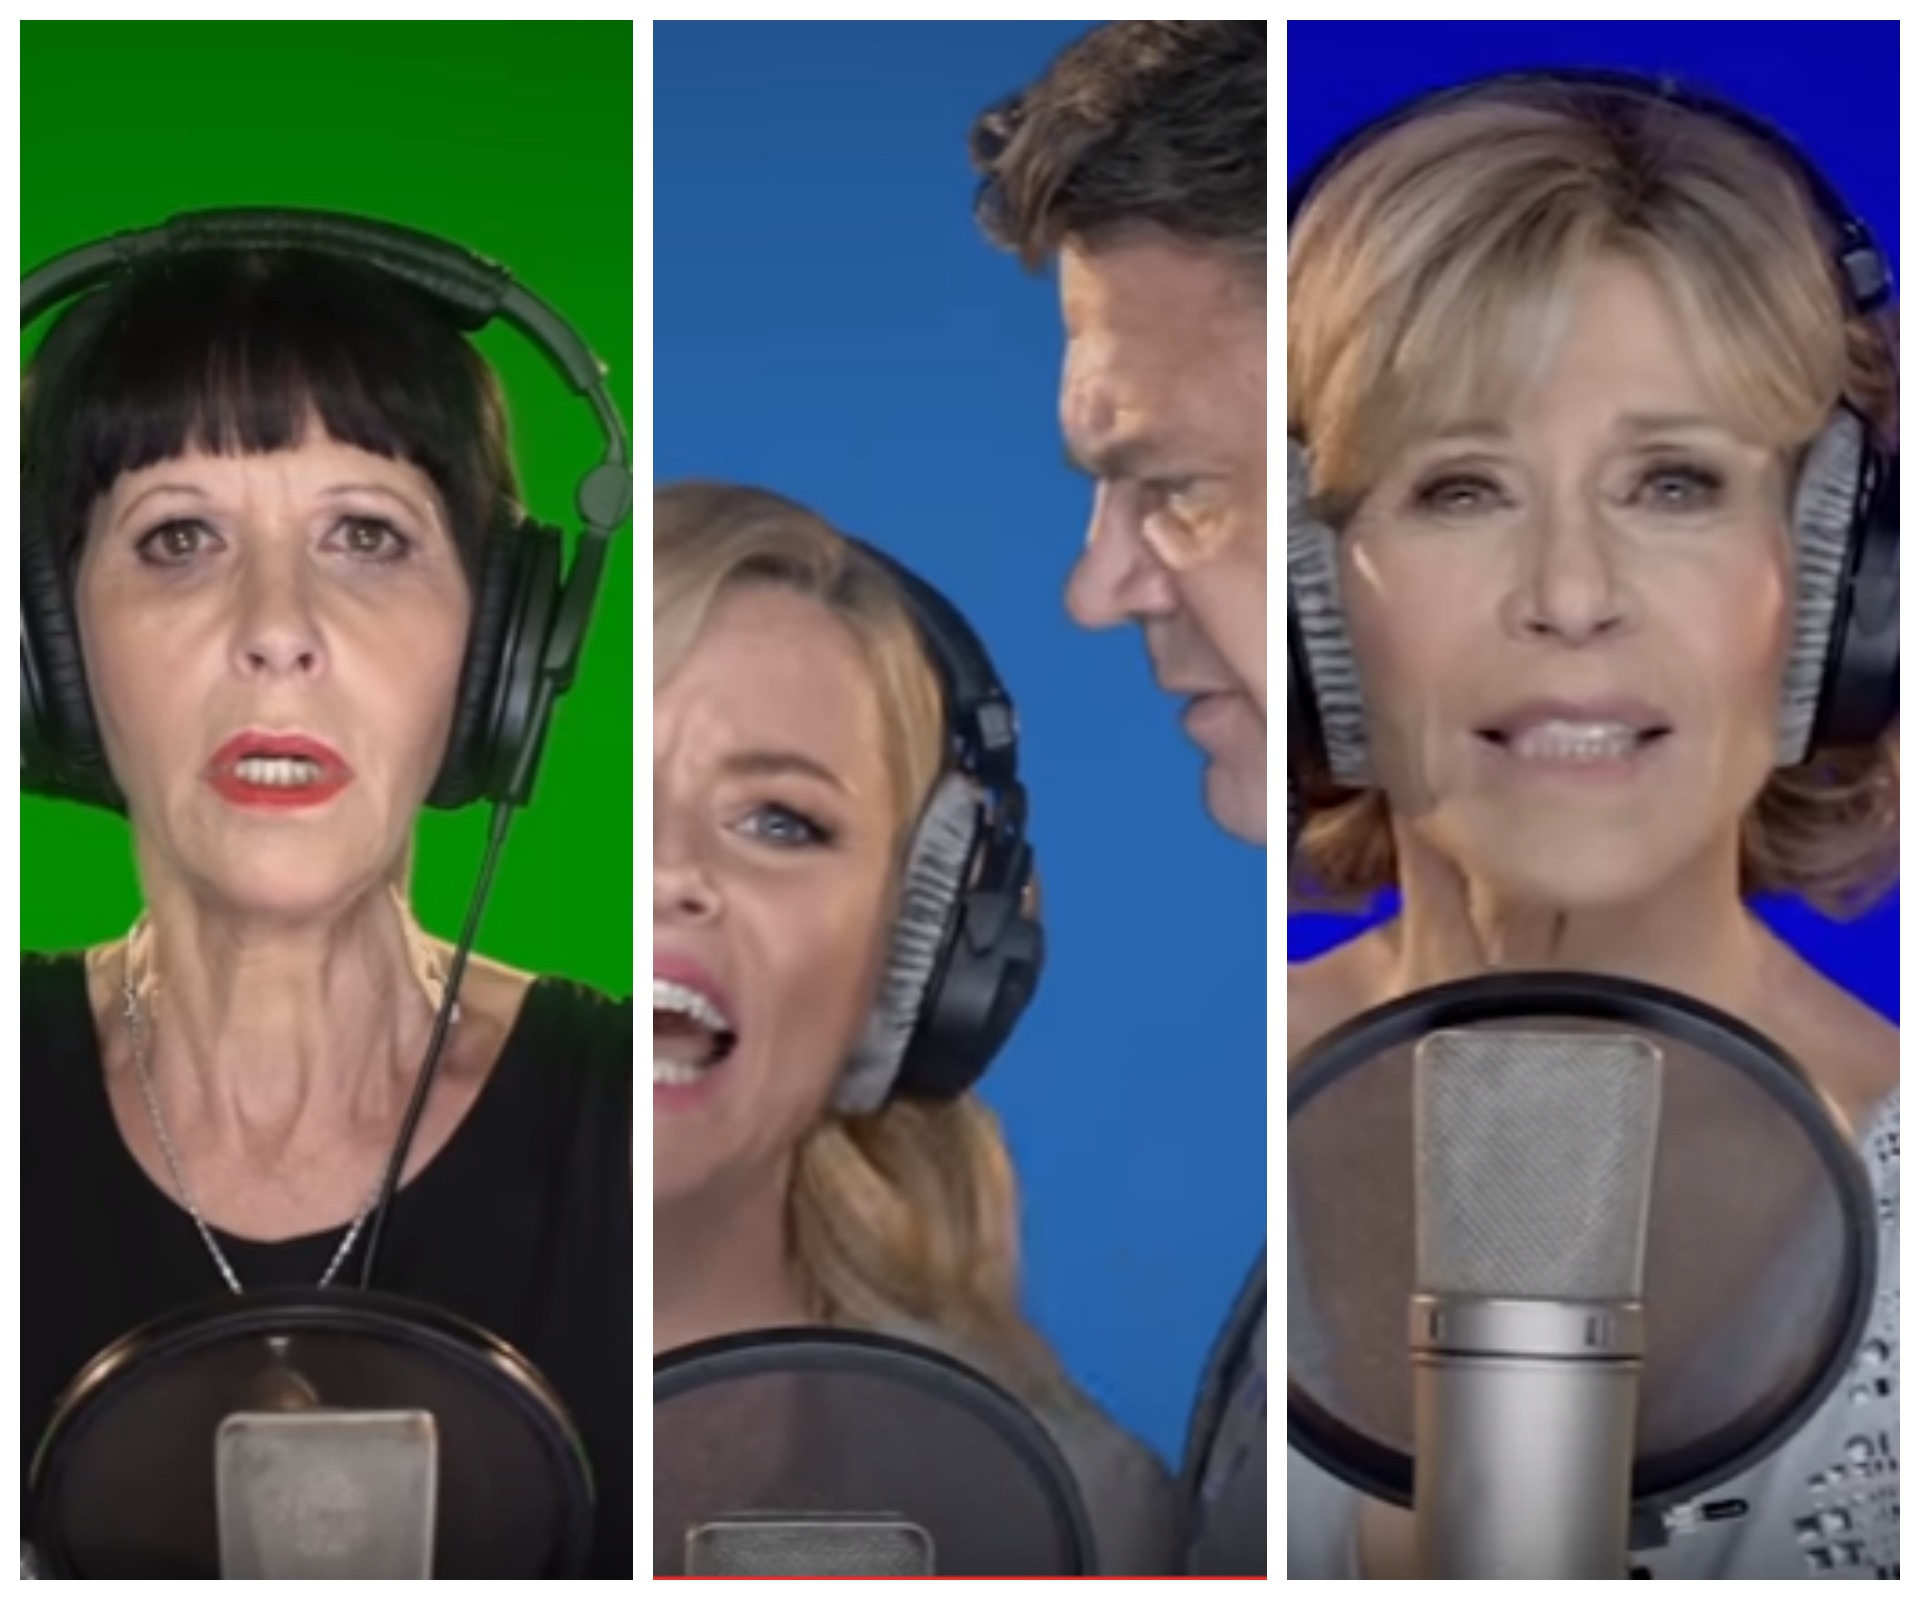 Celebrities sing ‘fight song’ tribute to Hillary Clinton